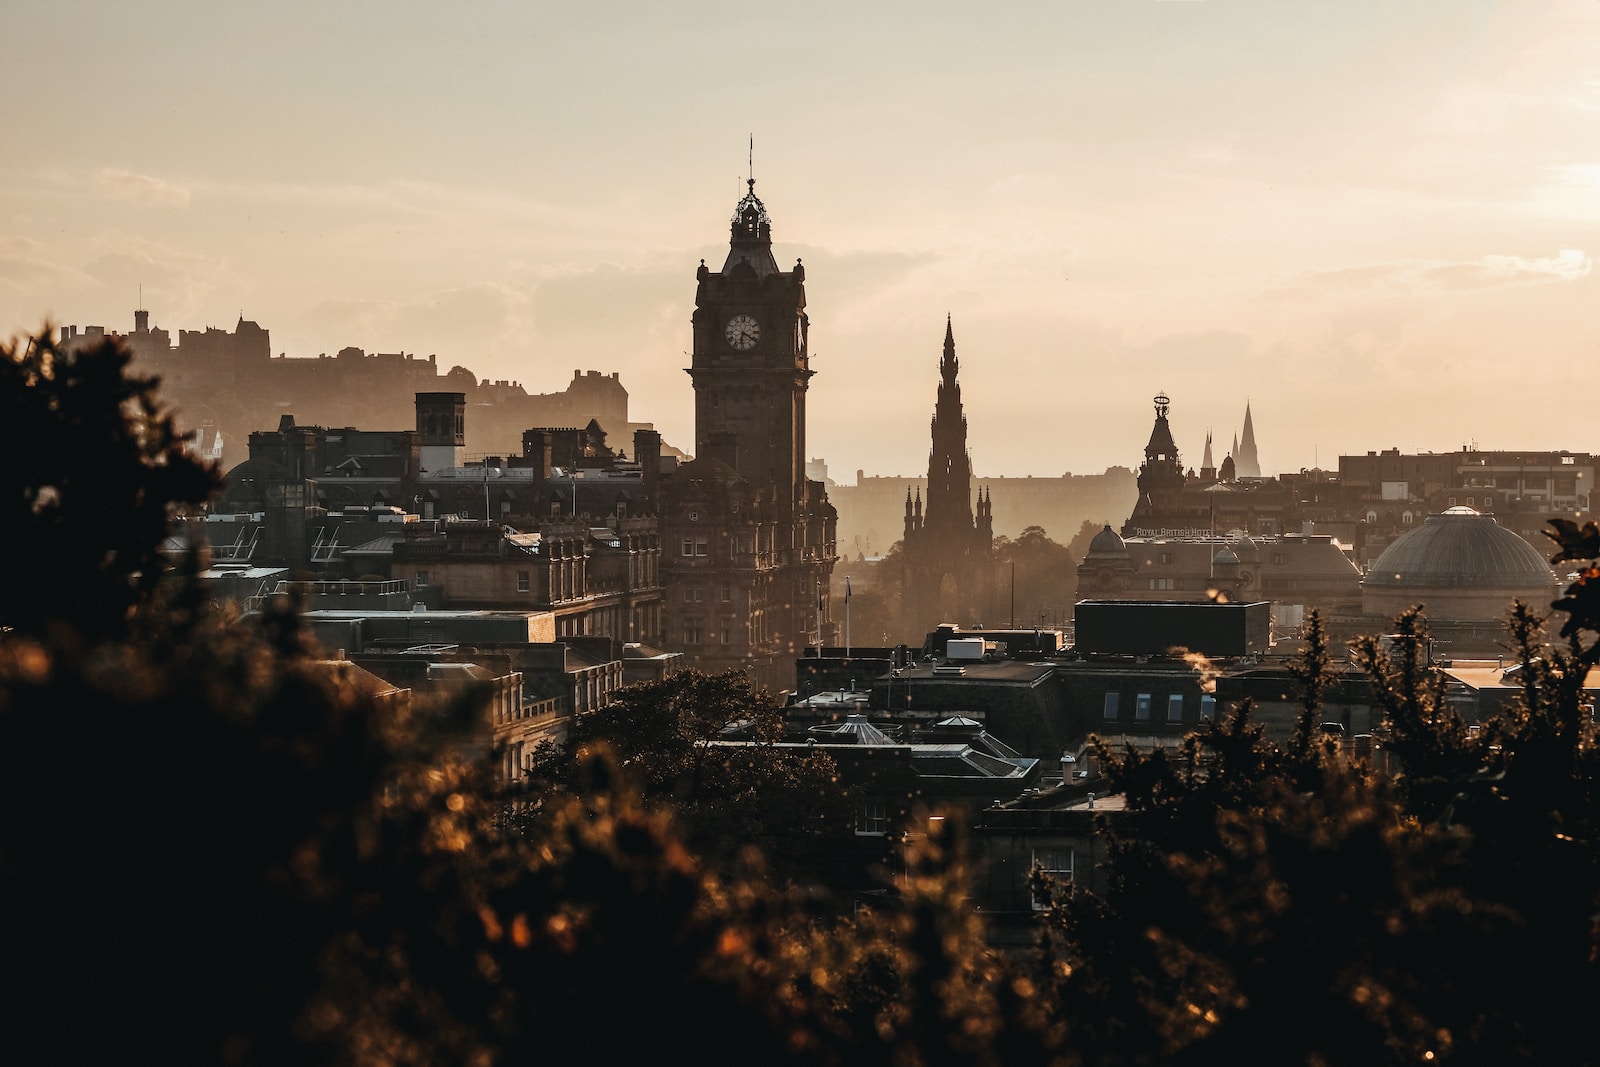 Ready for your next property investment? Think Edinburgh!